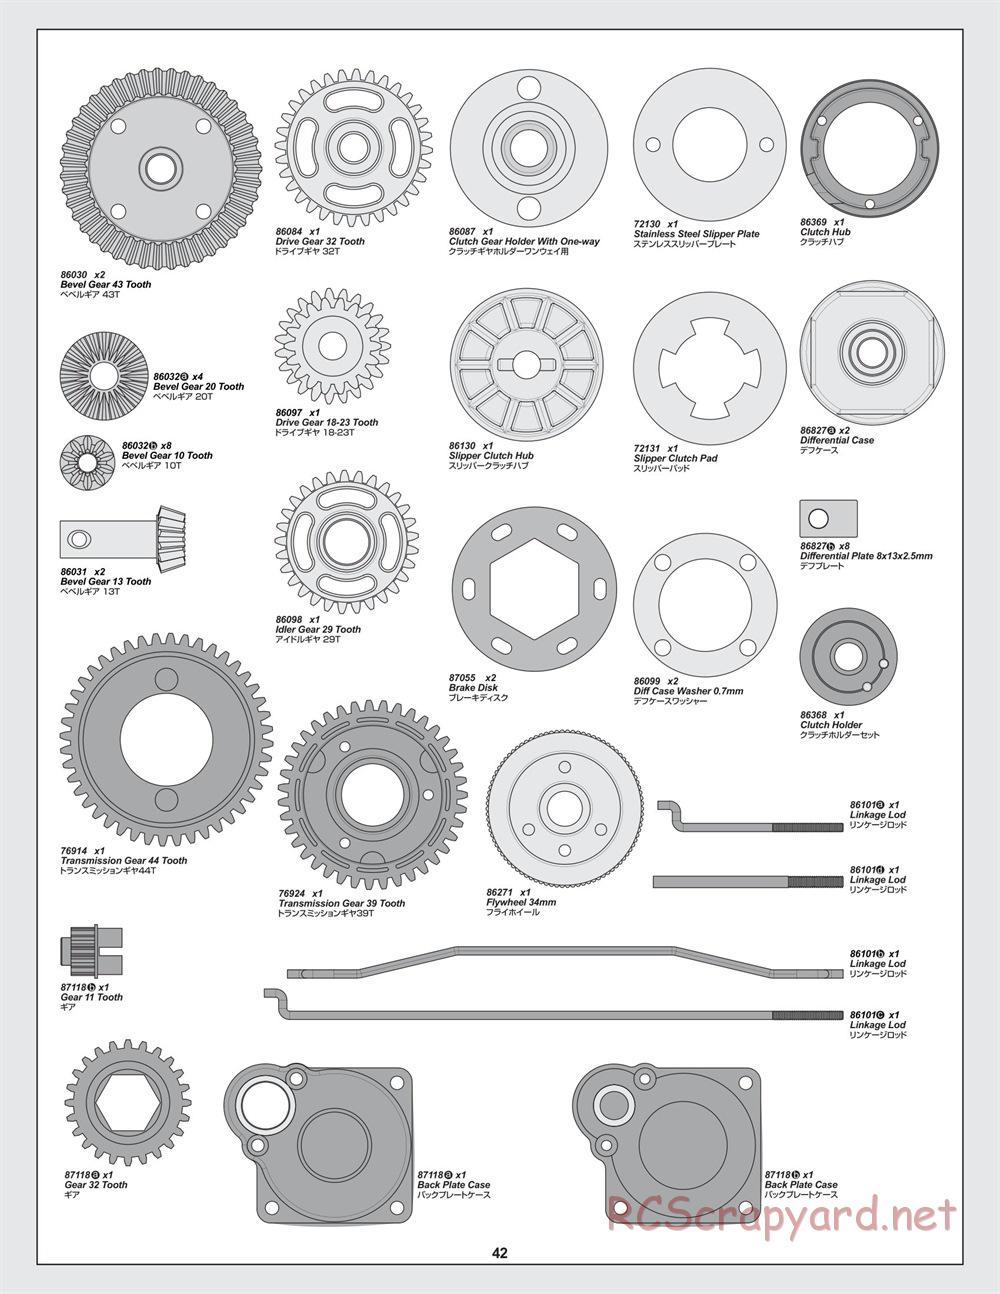 HPI - Savage-X 4.6 - Exploded View - Page 42